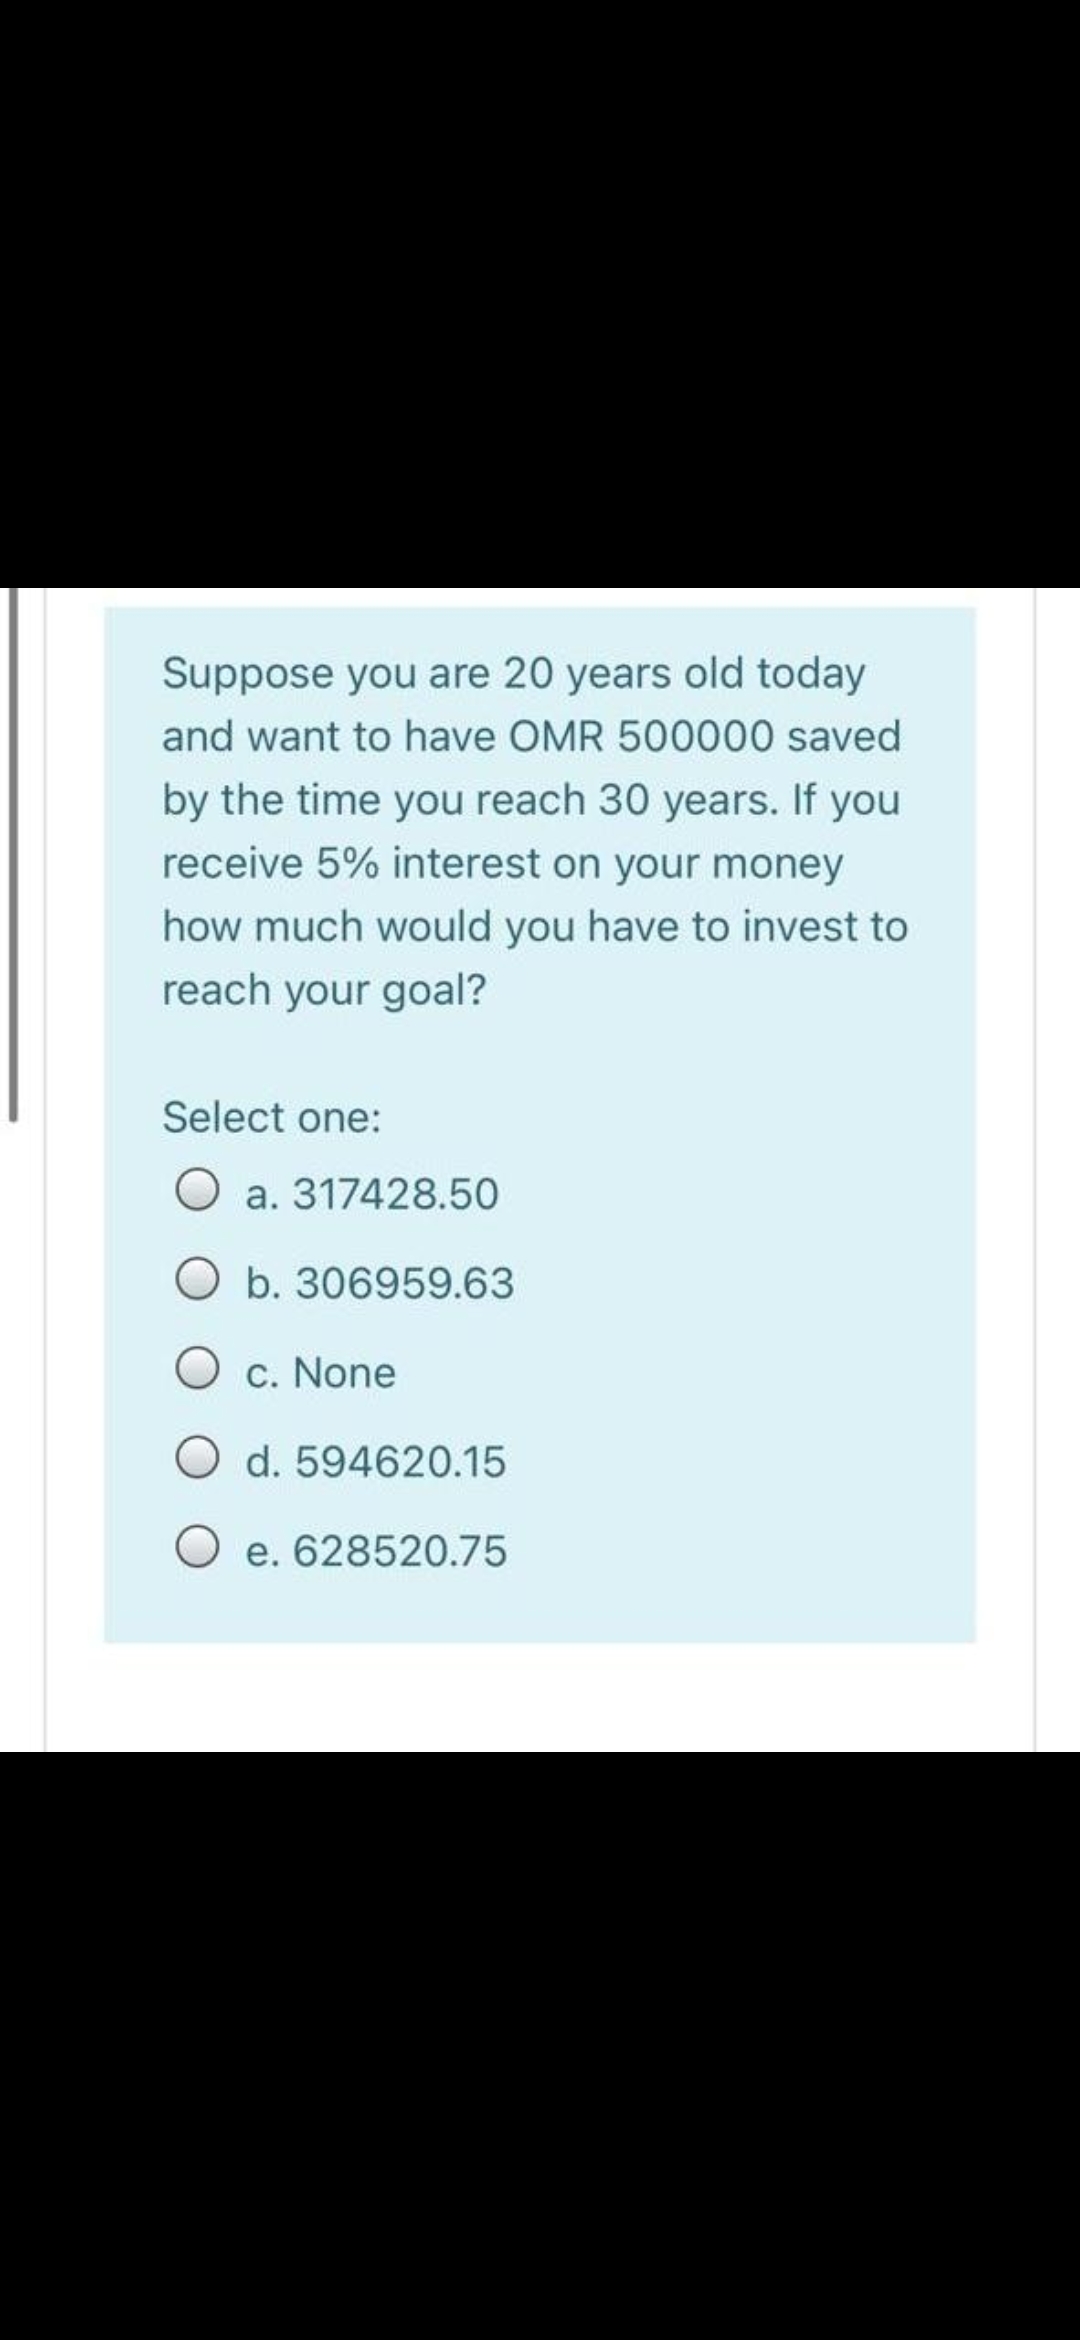 Suppose you are 20 years old today
and want to have OMR 500000 saved
by the time you reach 30 years. If you
receive 5% interest on your money
how much would you have to invest to
reach your goal?
Select one:
O a. 317428.50
O b. 306959.63
O c. None
O d. 594620.15
e. 628520.75
